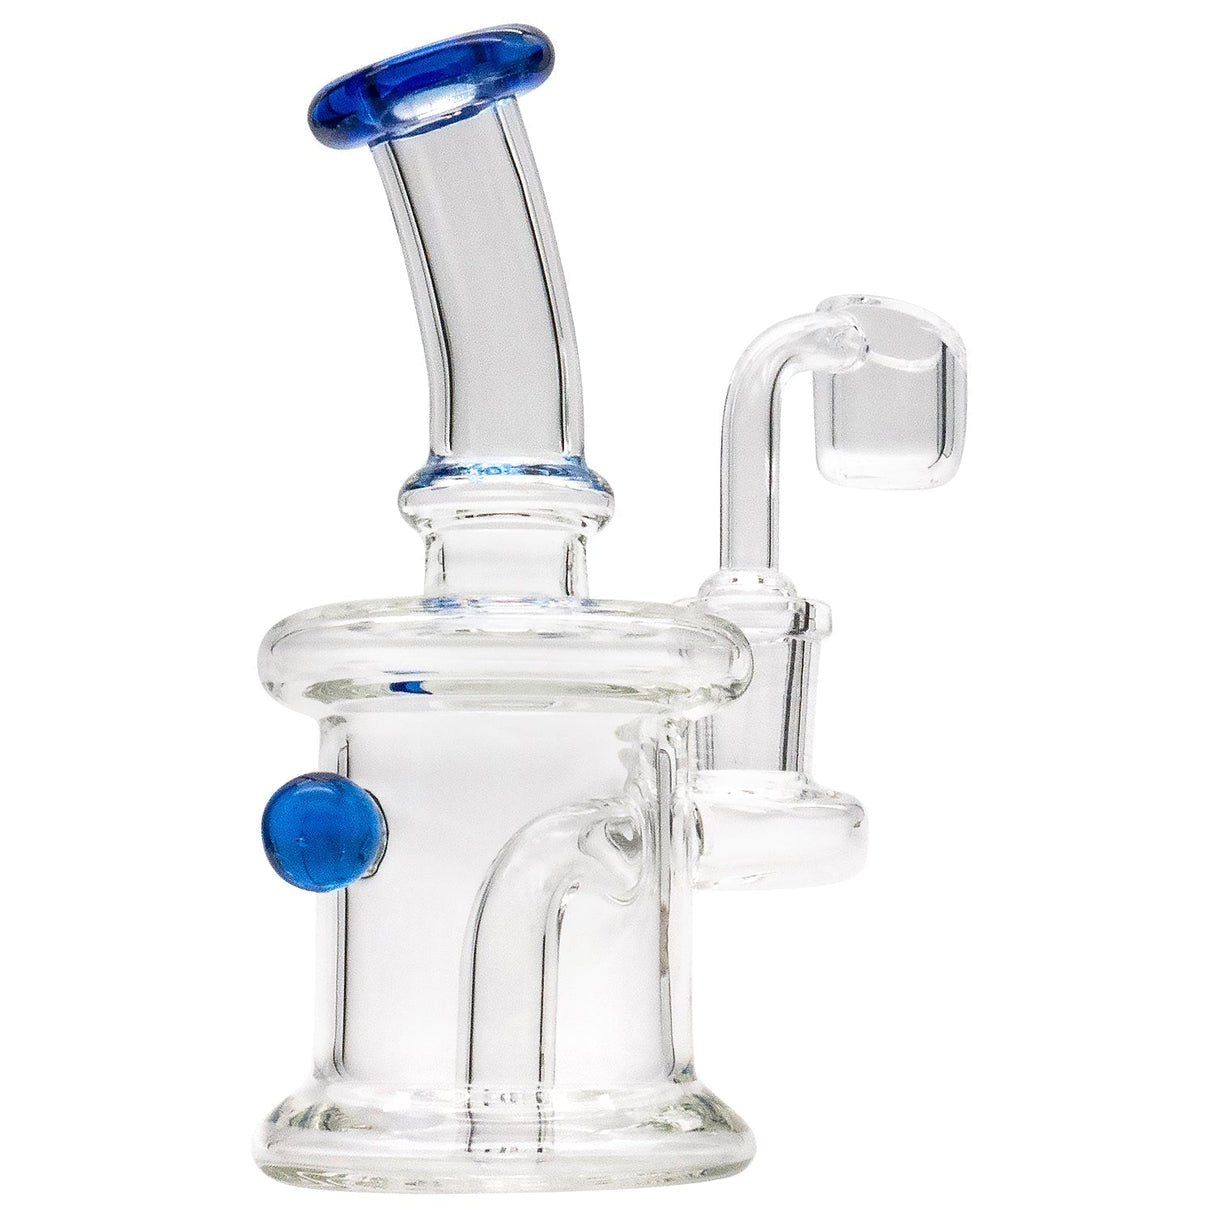 Glassic Compact Barrel Banger Hanger Rig with blue accents, front view on white background